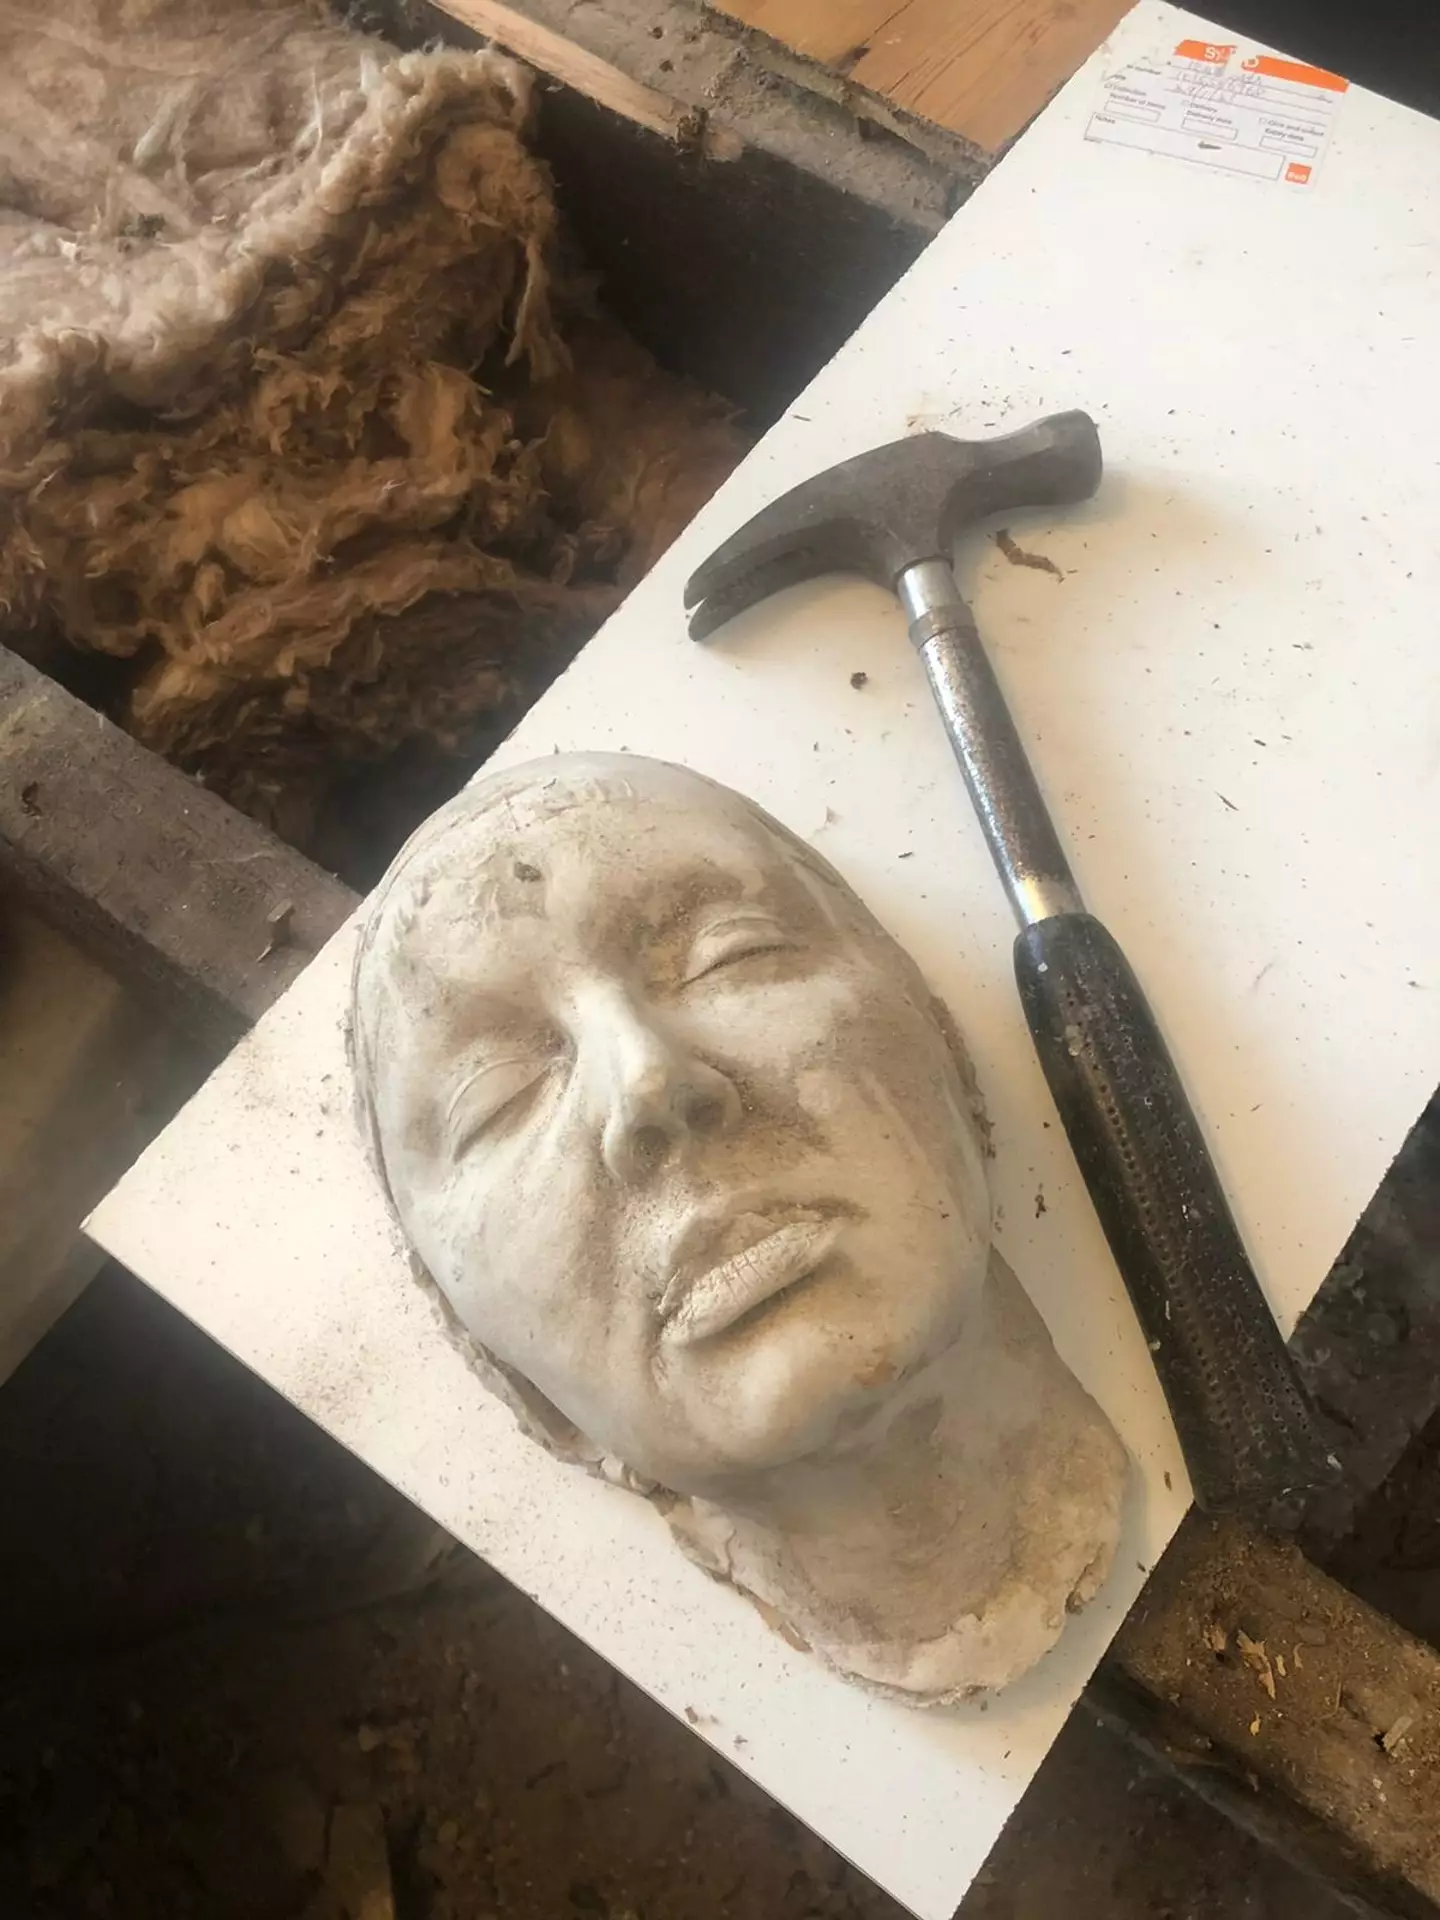 The couple found the death mask under the floorboards.